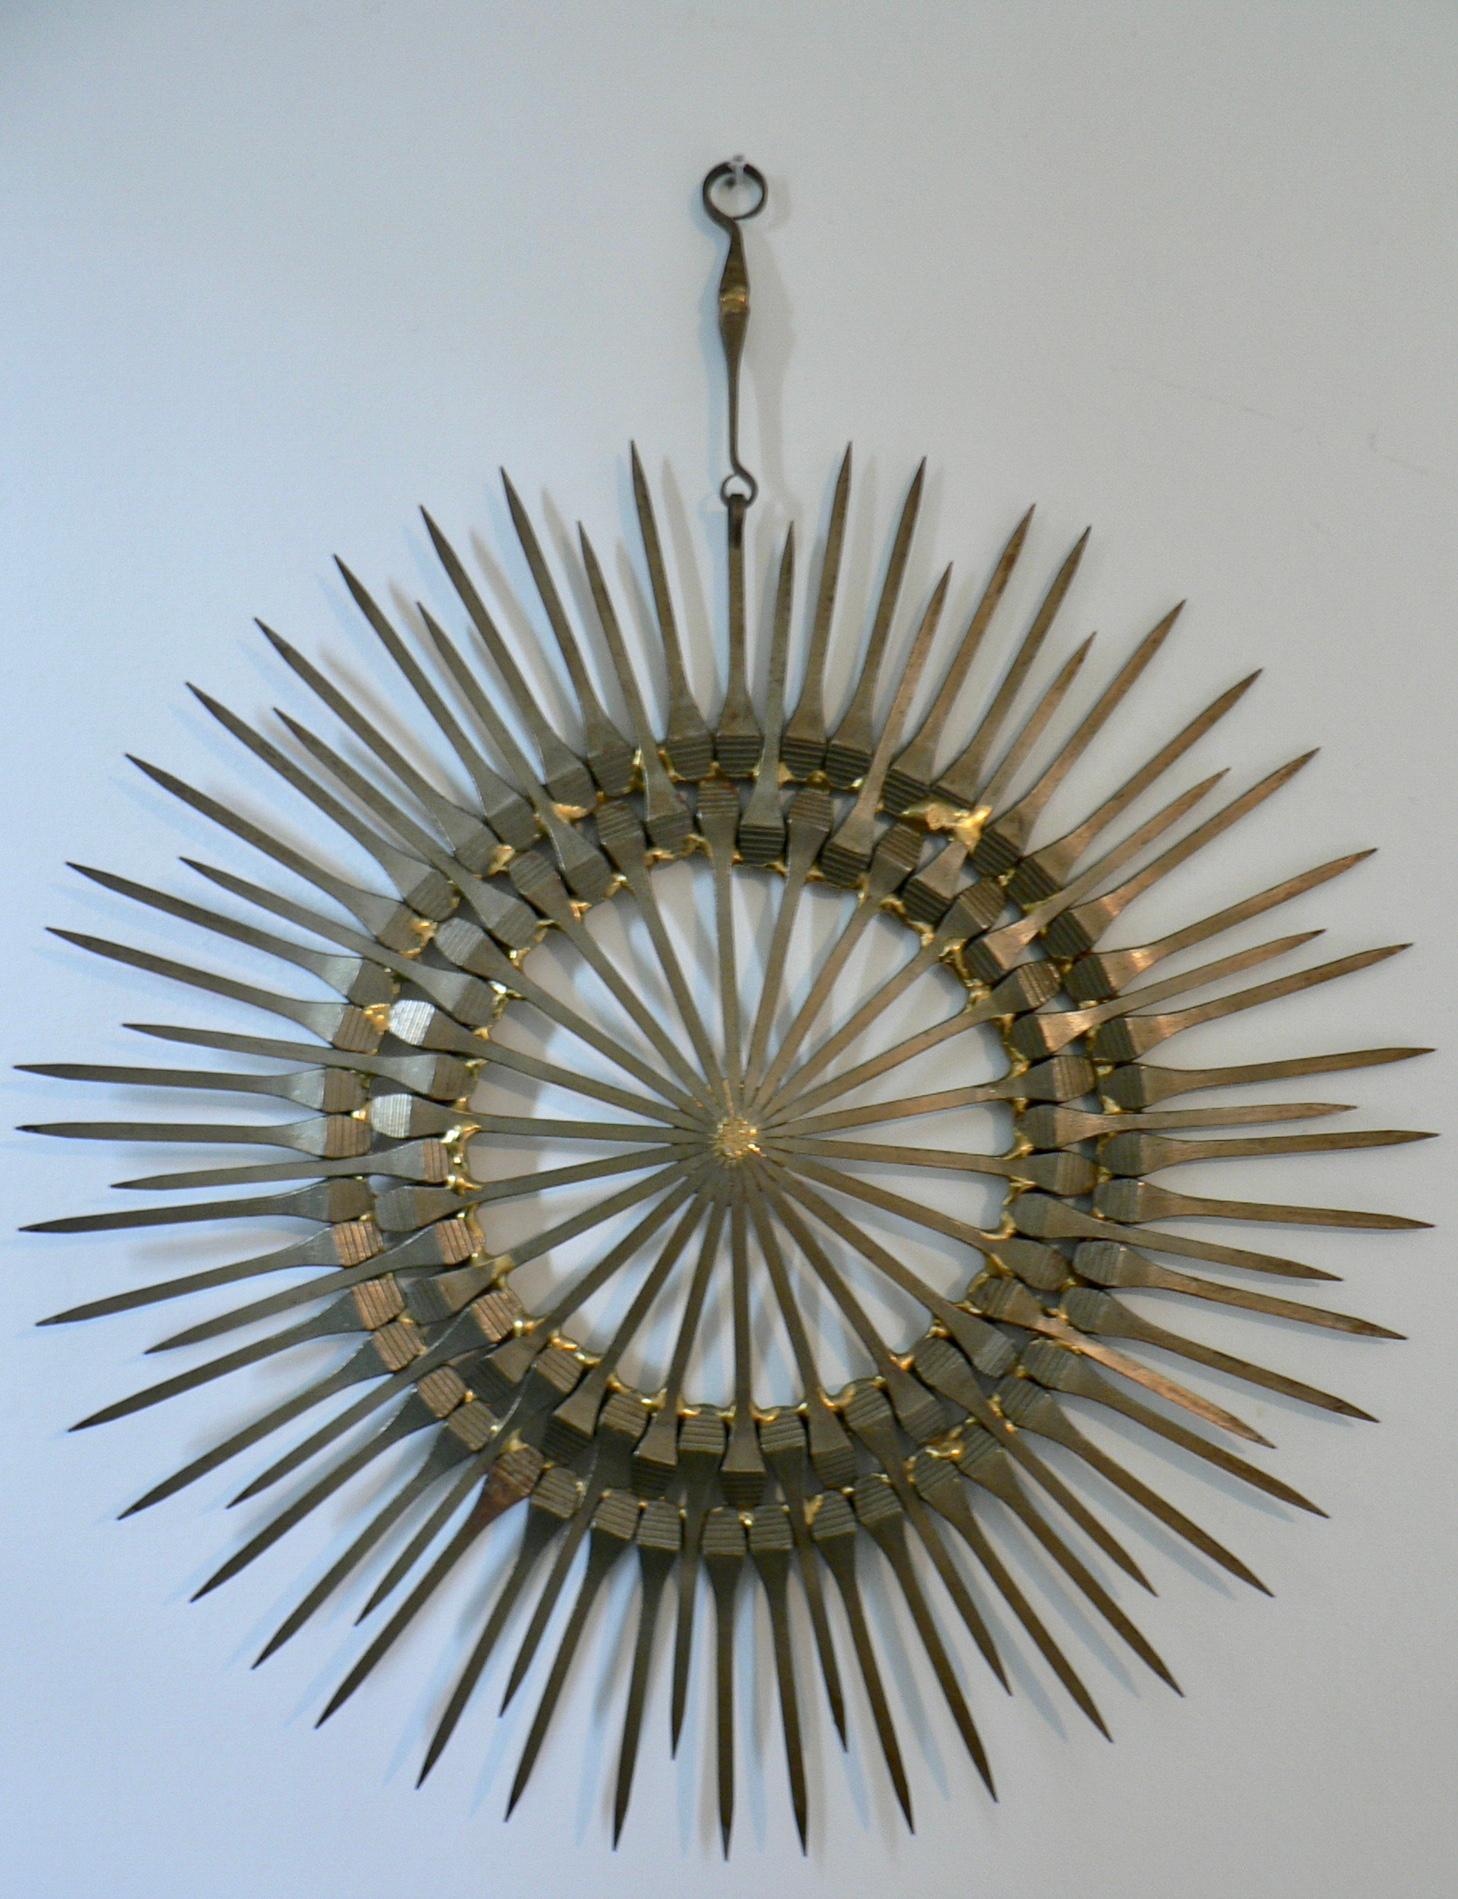 Late 20th Century Mid-Century Modern Gilt Iron Sunburst Wall Sculpture by William Bowie For Sale